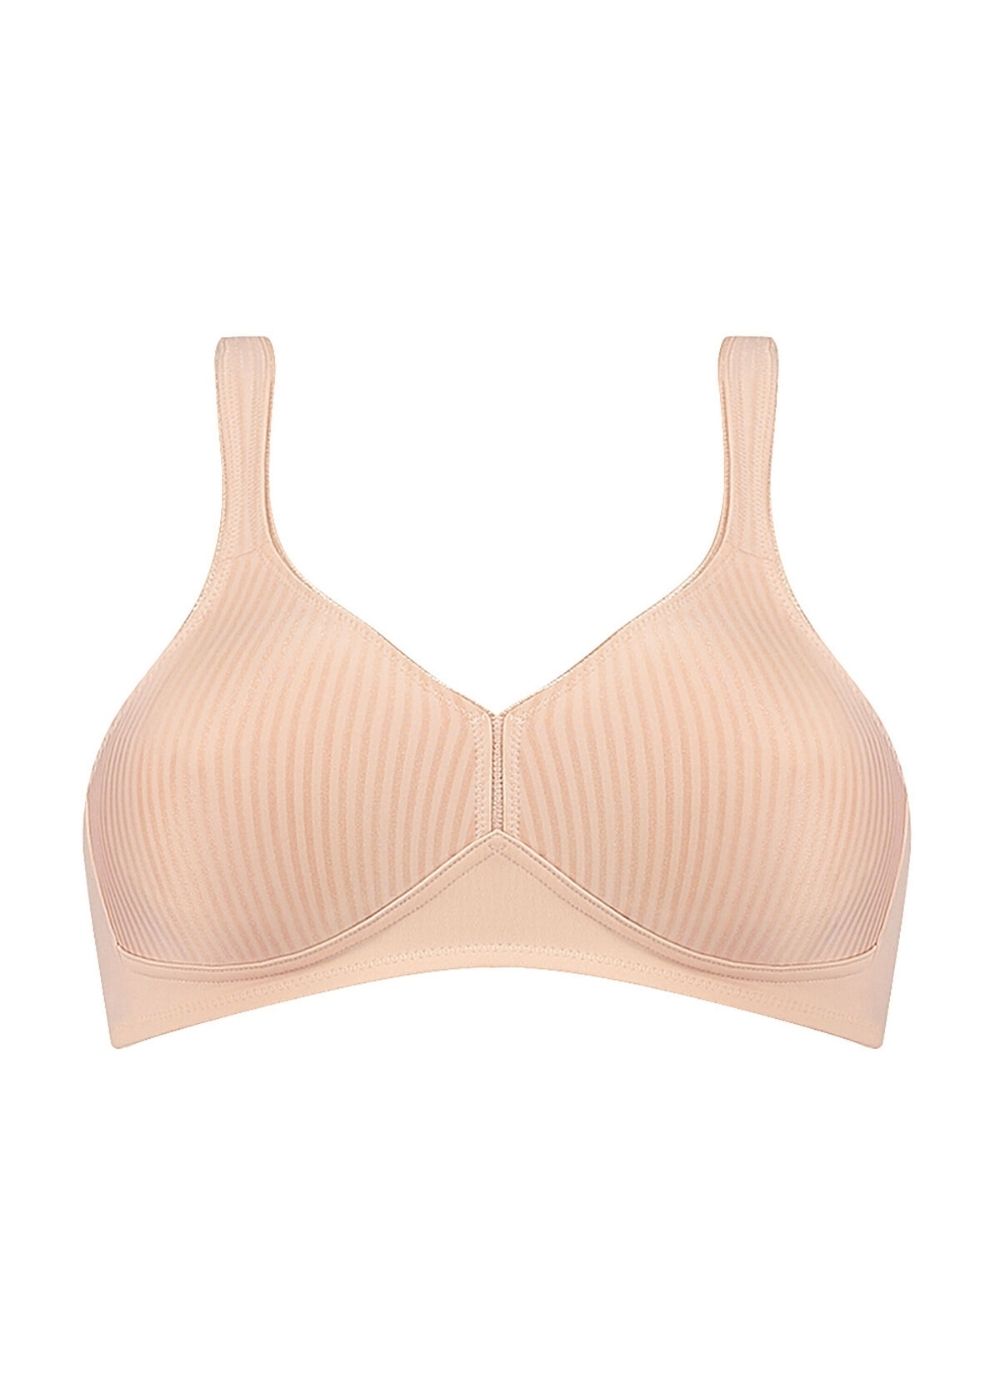 Triumph Bras - Perfectly Soft 10131358 - Nude.